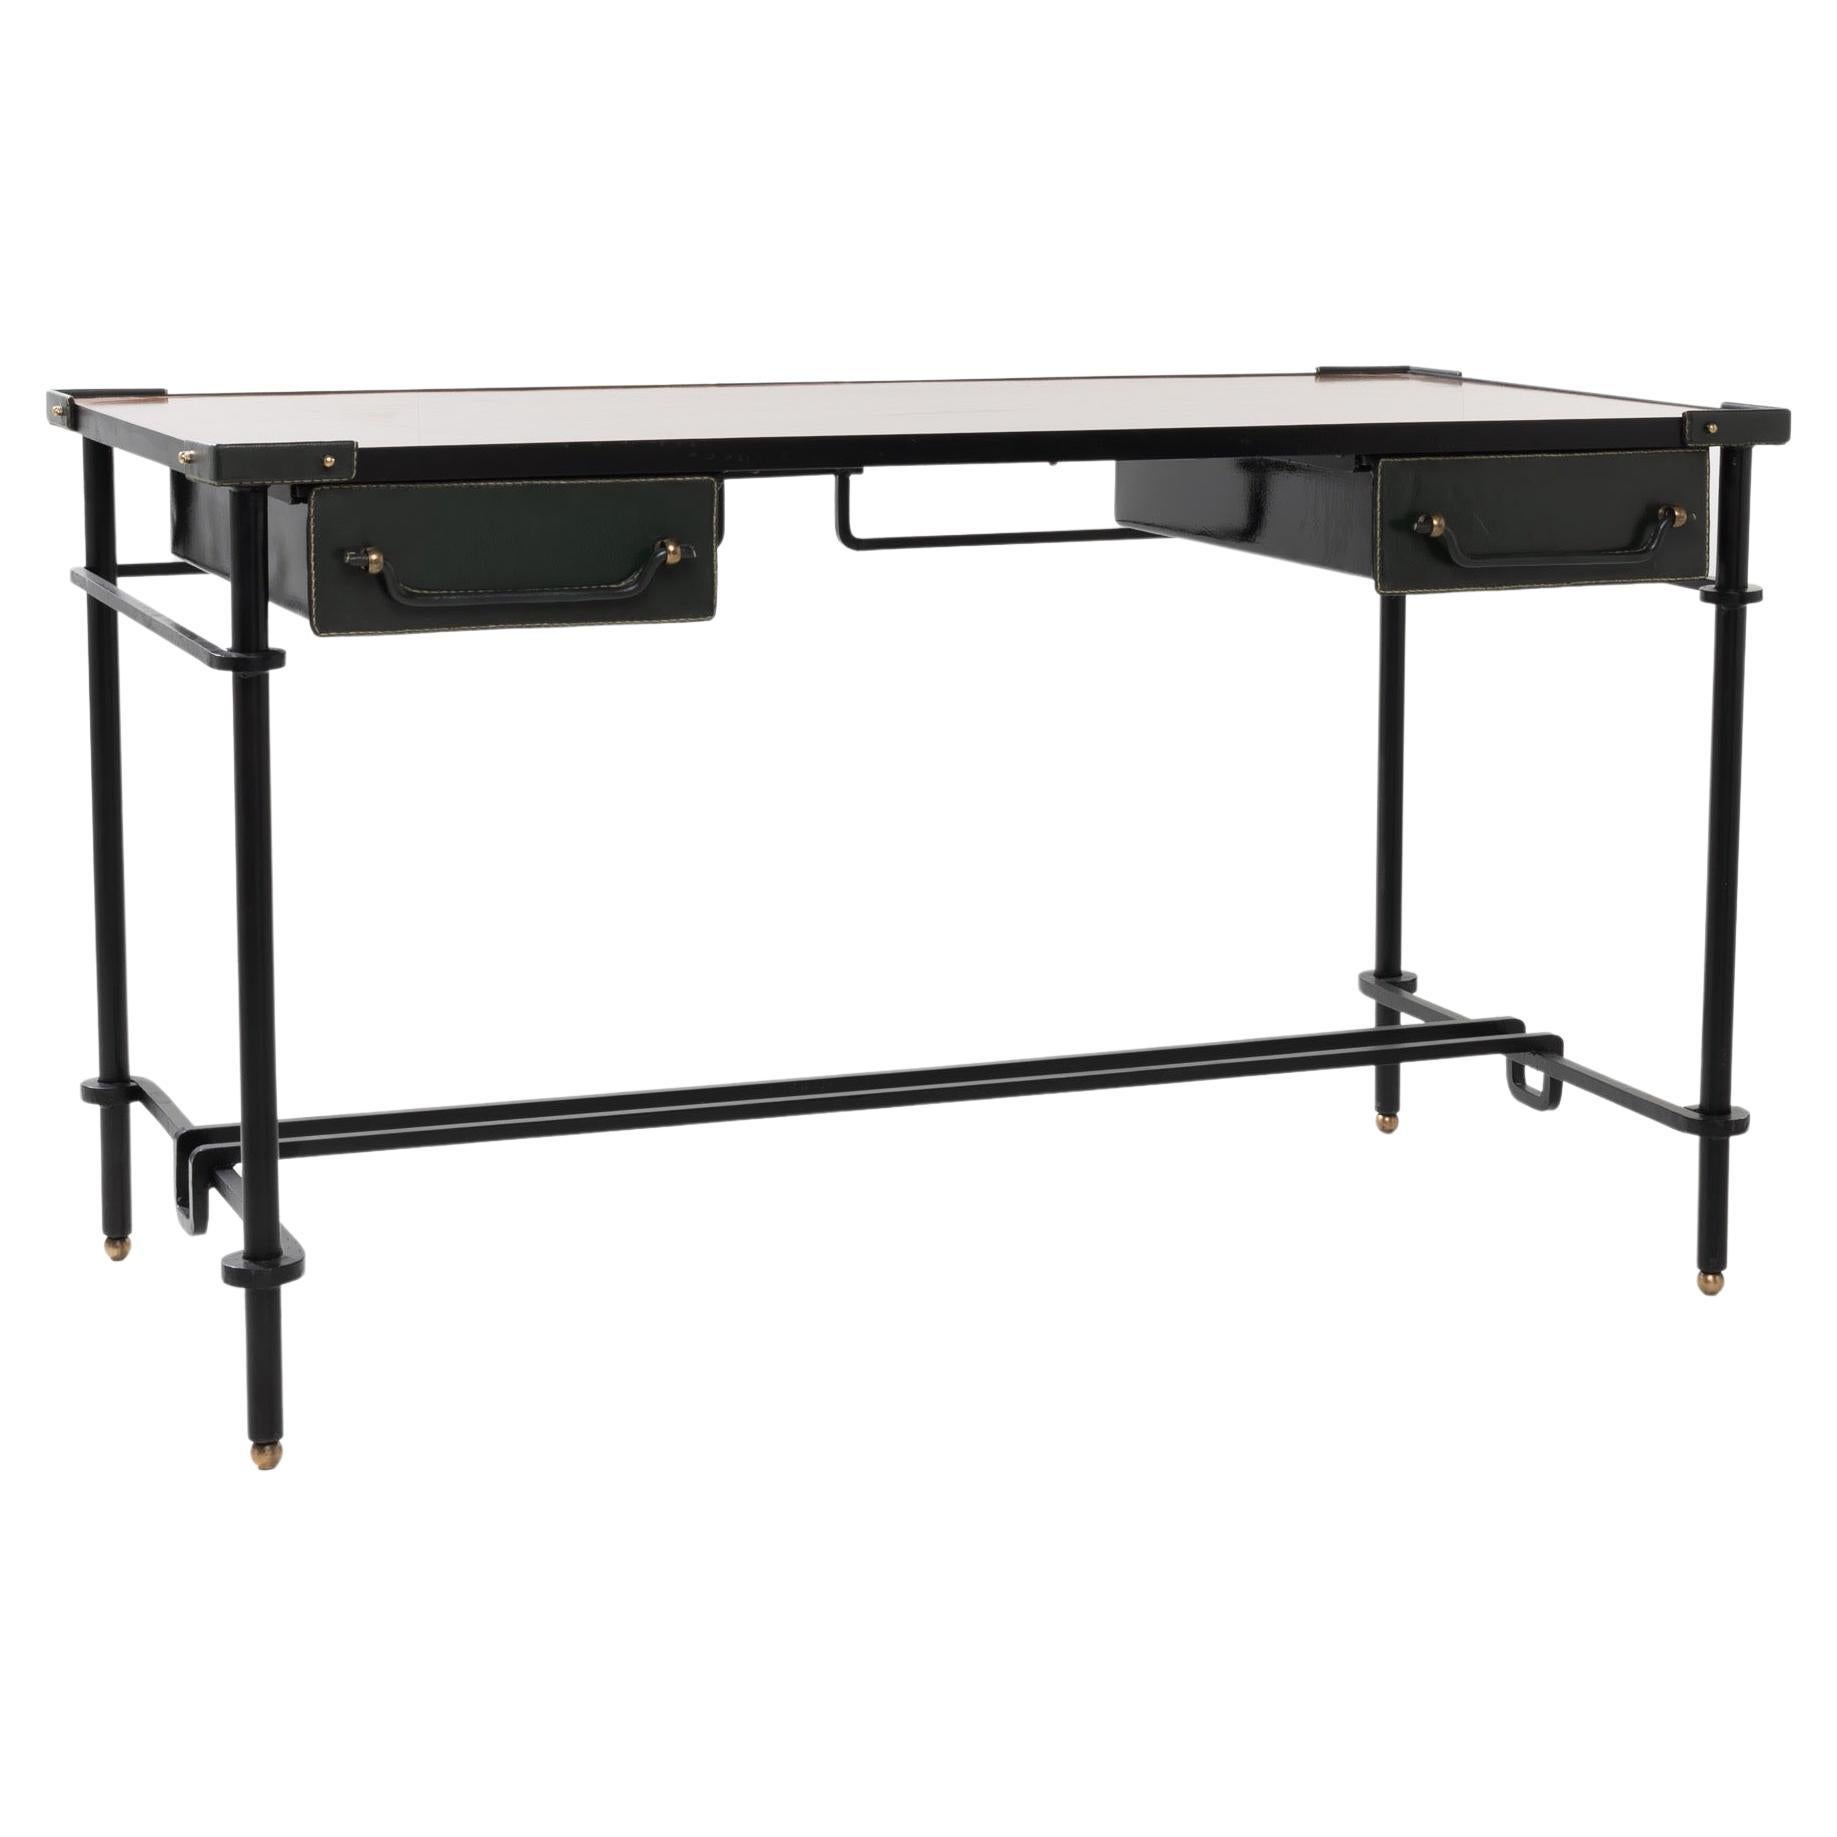 Wrought Iron Desk with Two Sliding Drawers by Jacques Adnet